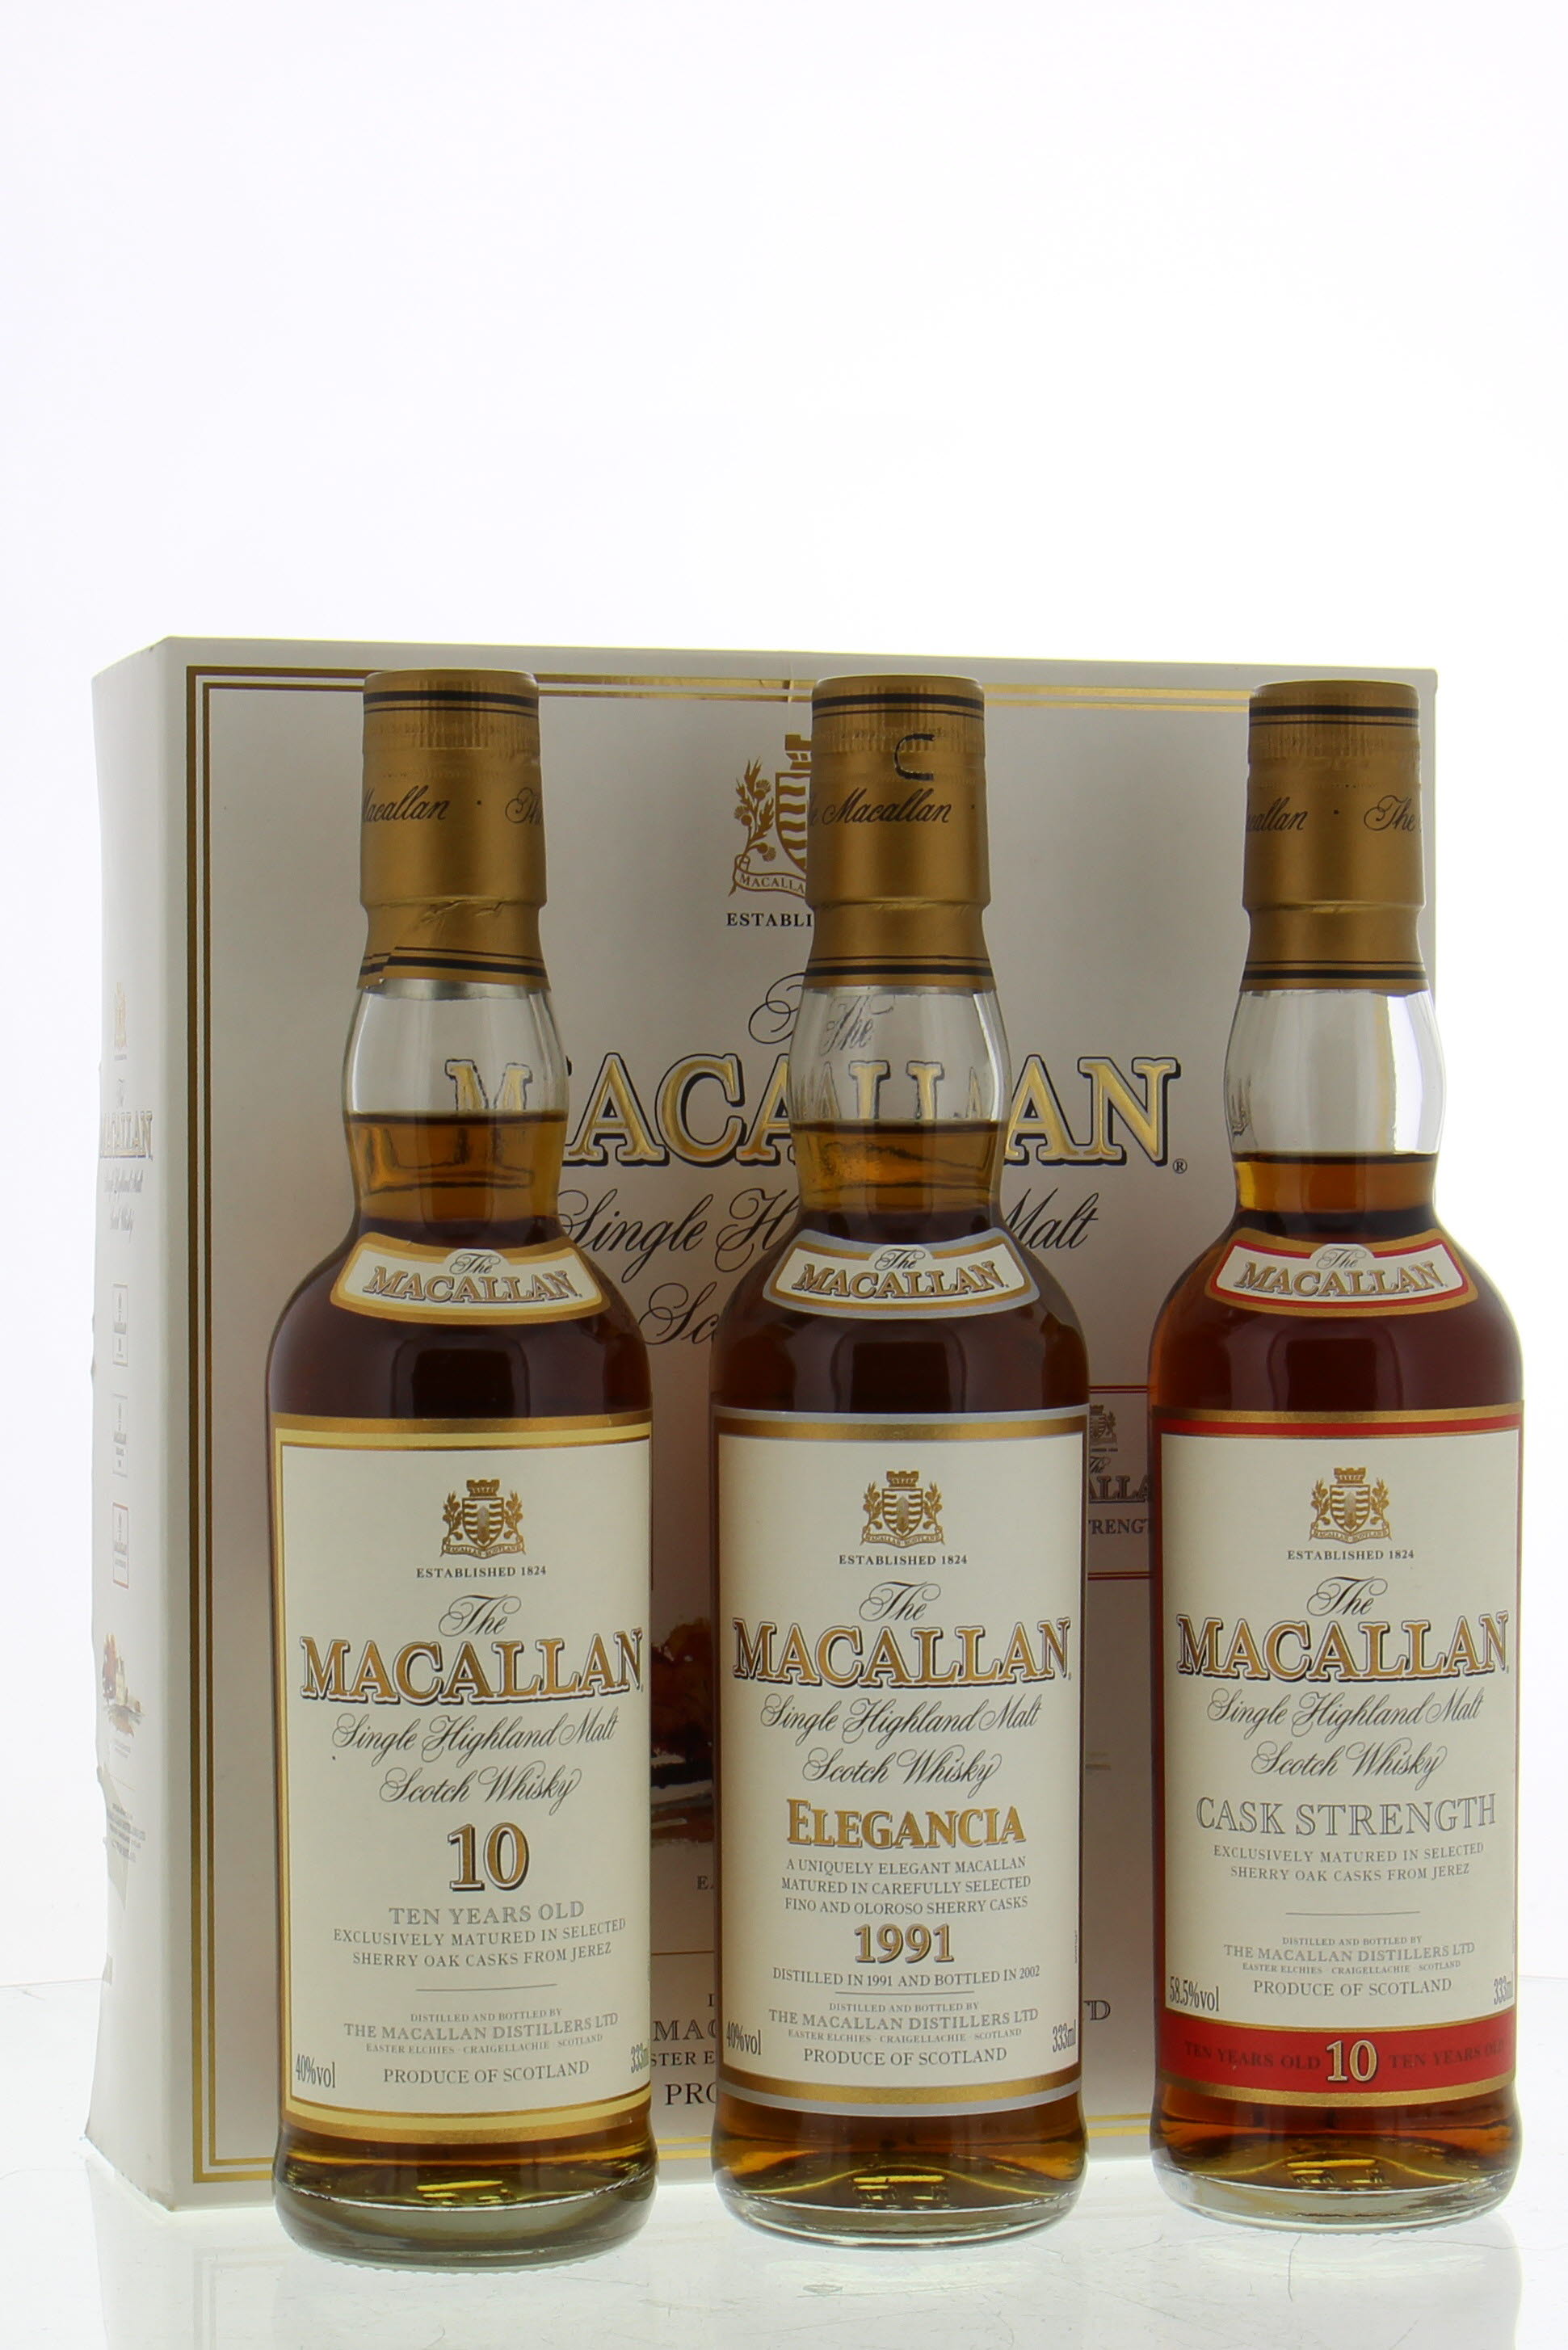 Macallan - Giftset Elegancia 10 years old and Cask Strength 1991